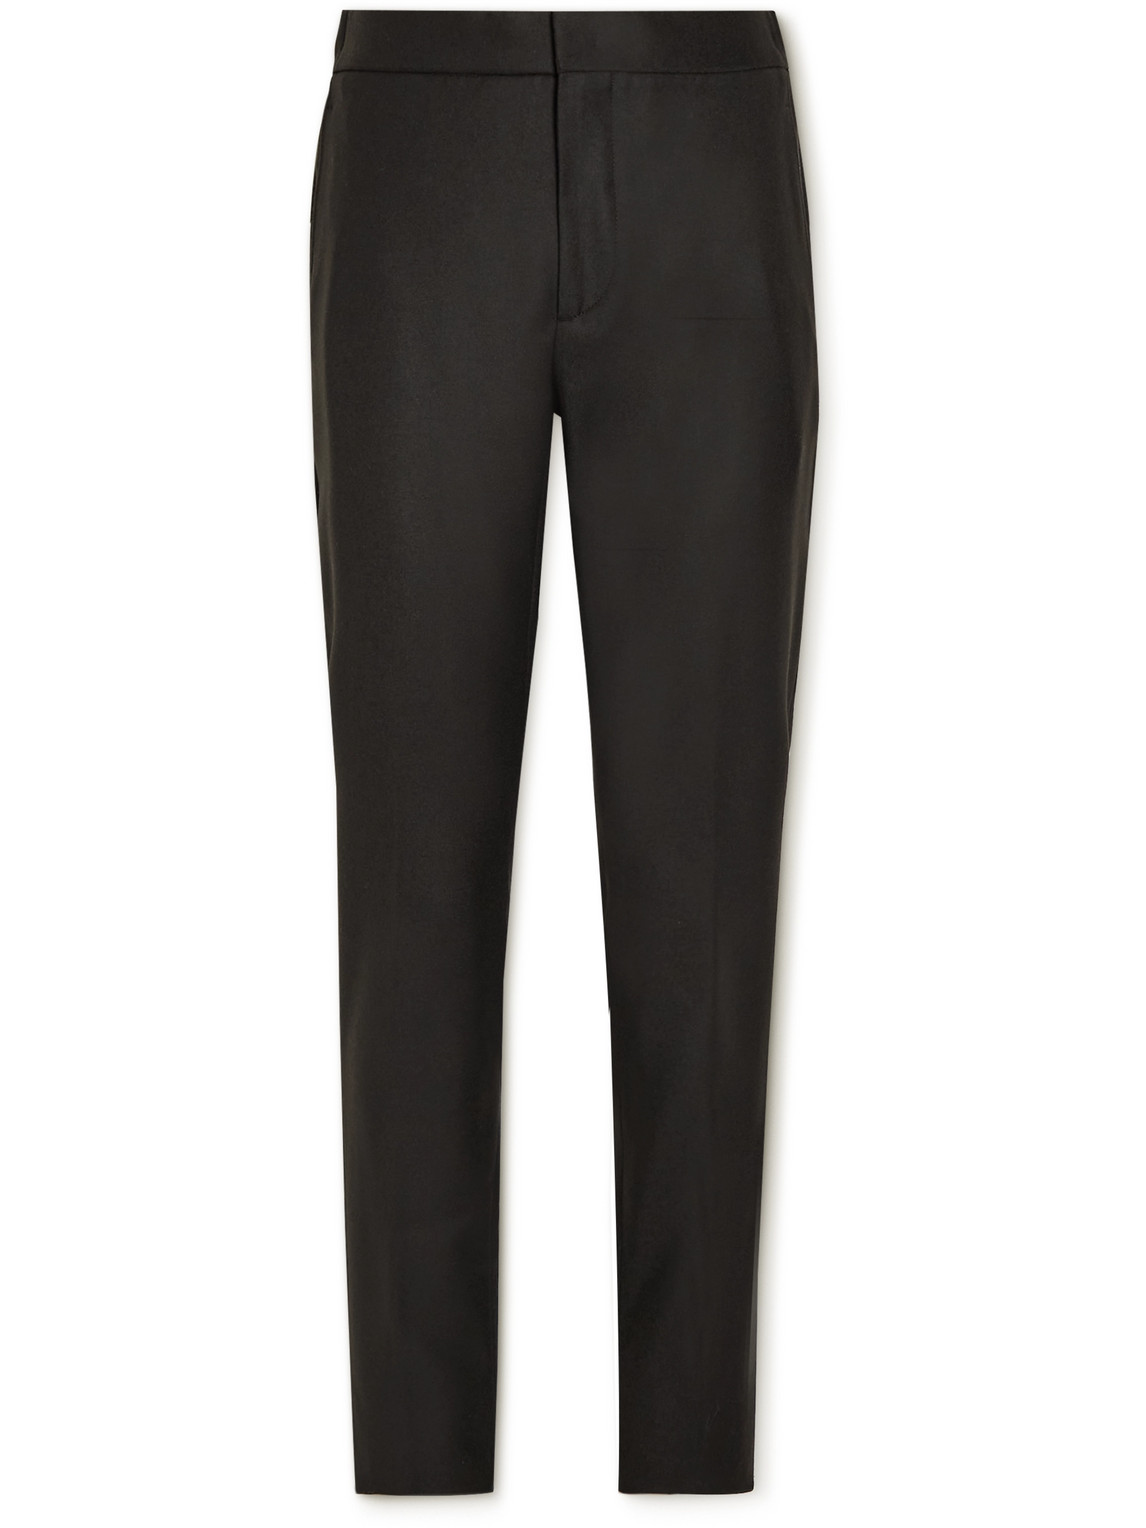 LORO PIANA LEISURE CITY WOOL AND CASHMERE-BLEND TROUSERS